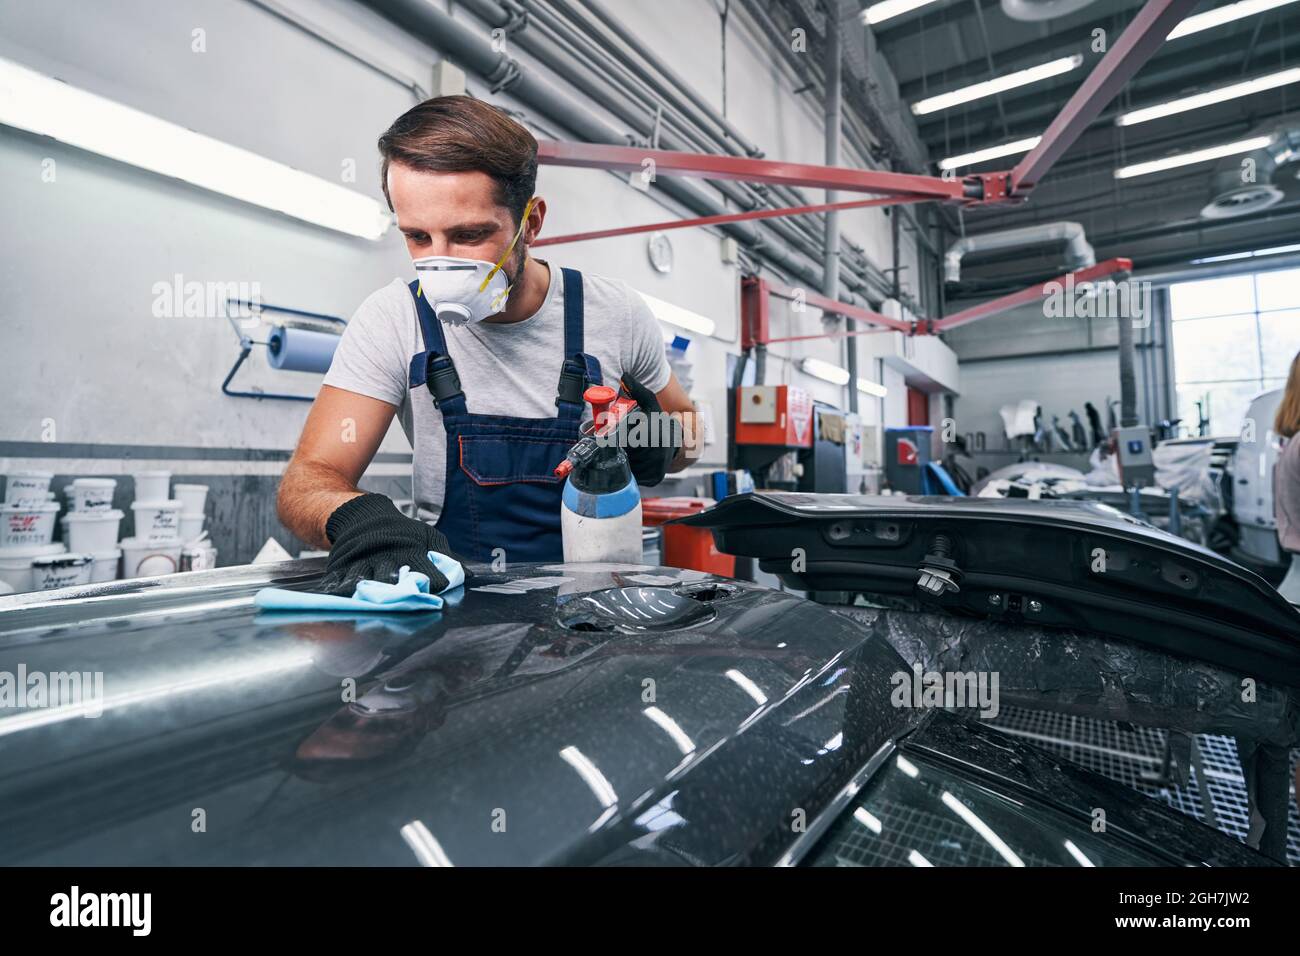 Mechanic washing car part and drying it with cloth Stock Photo